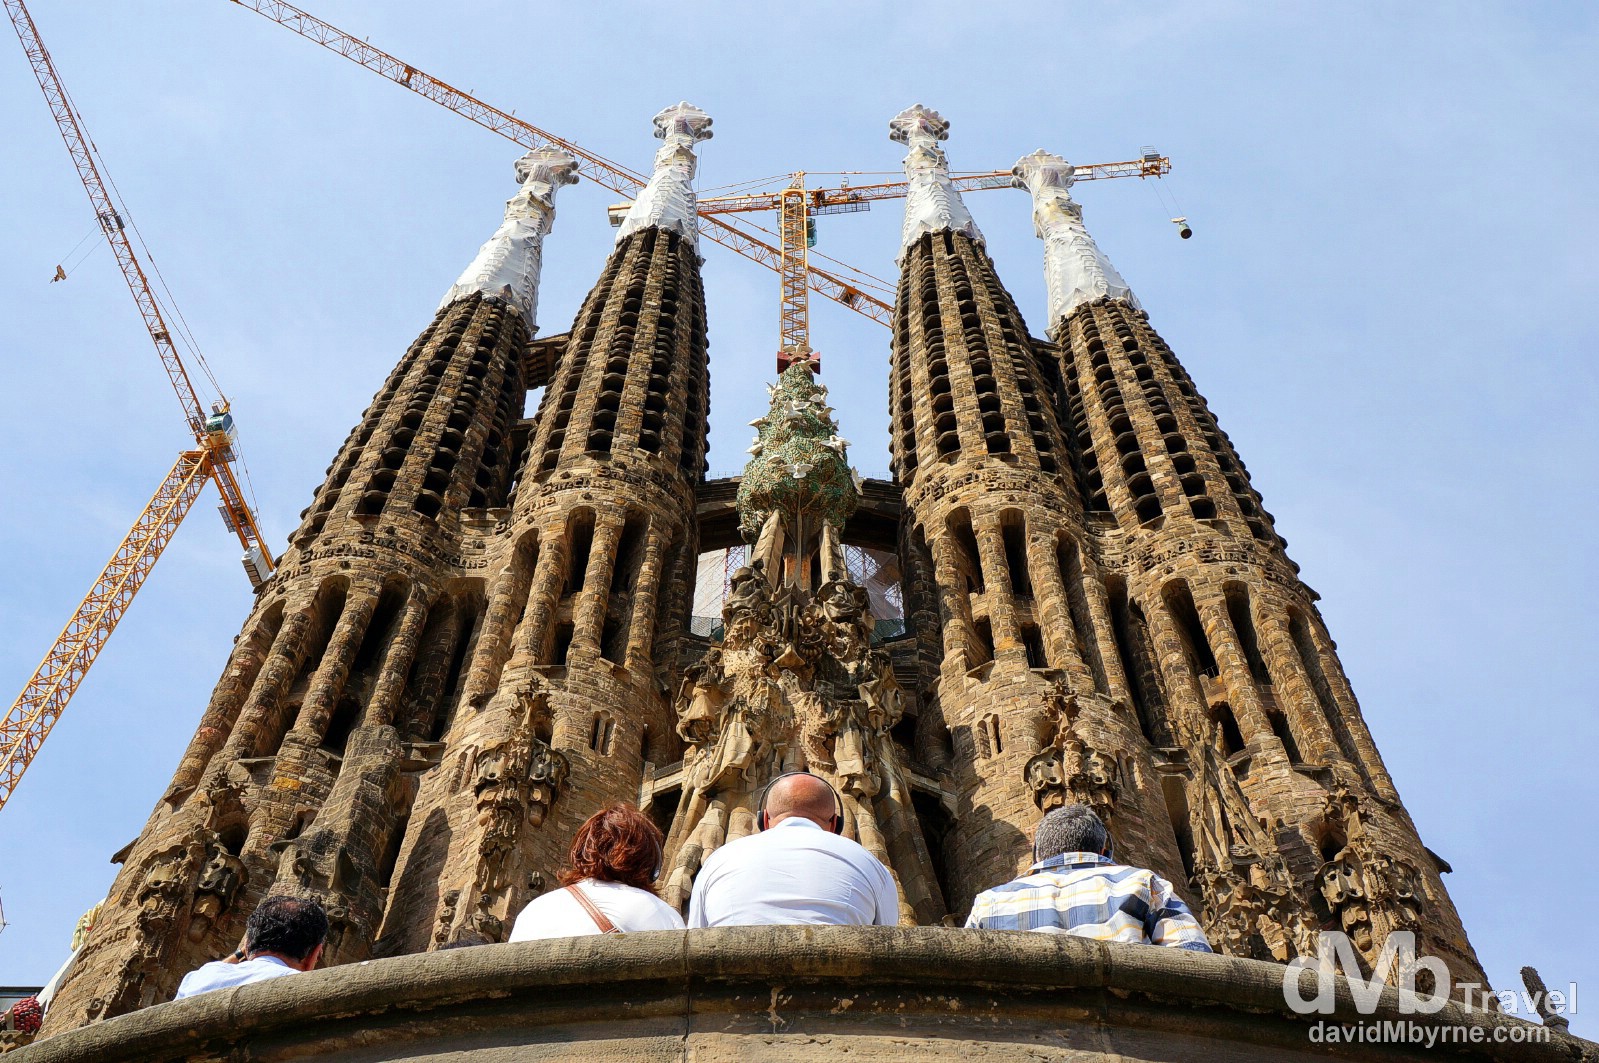 Admiring the Nativity facade & towers of the eastern side of the Sagrada Familia in Barcelona Spain. June 18th, 2014.